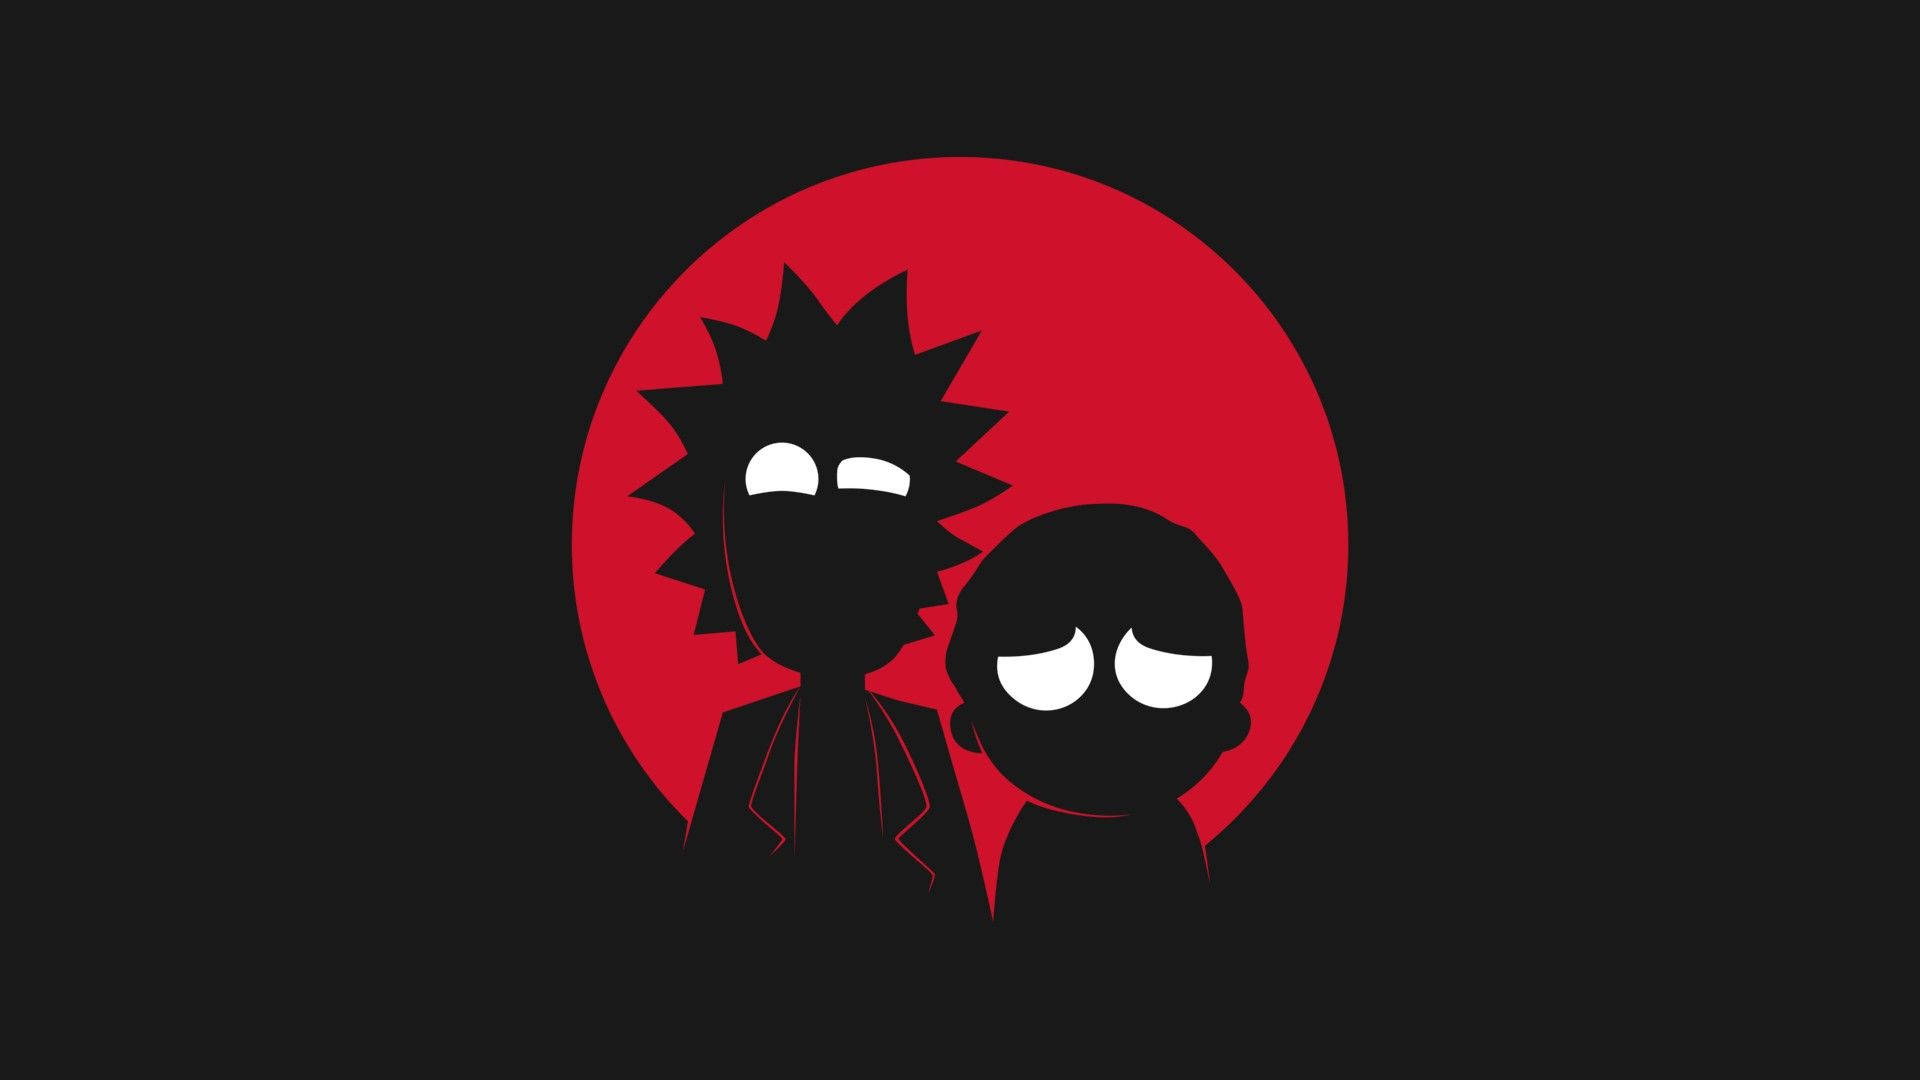 Red Rick And Morty Silhouette Minimalism Wallpaper